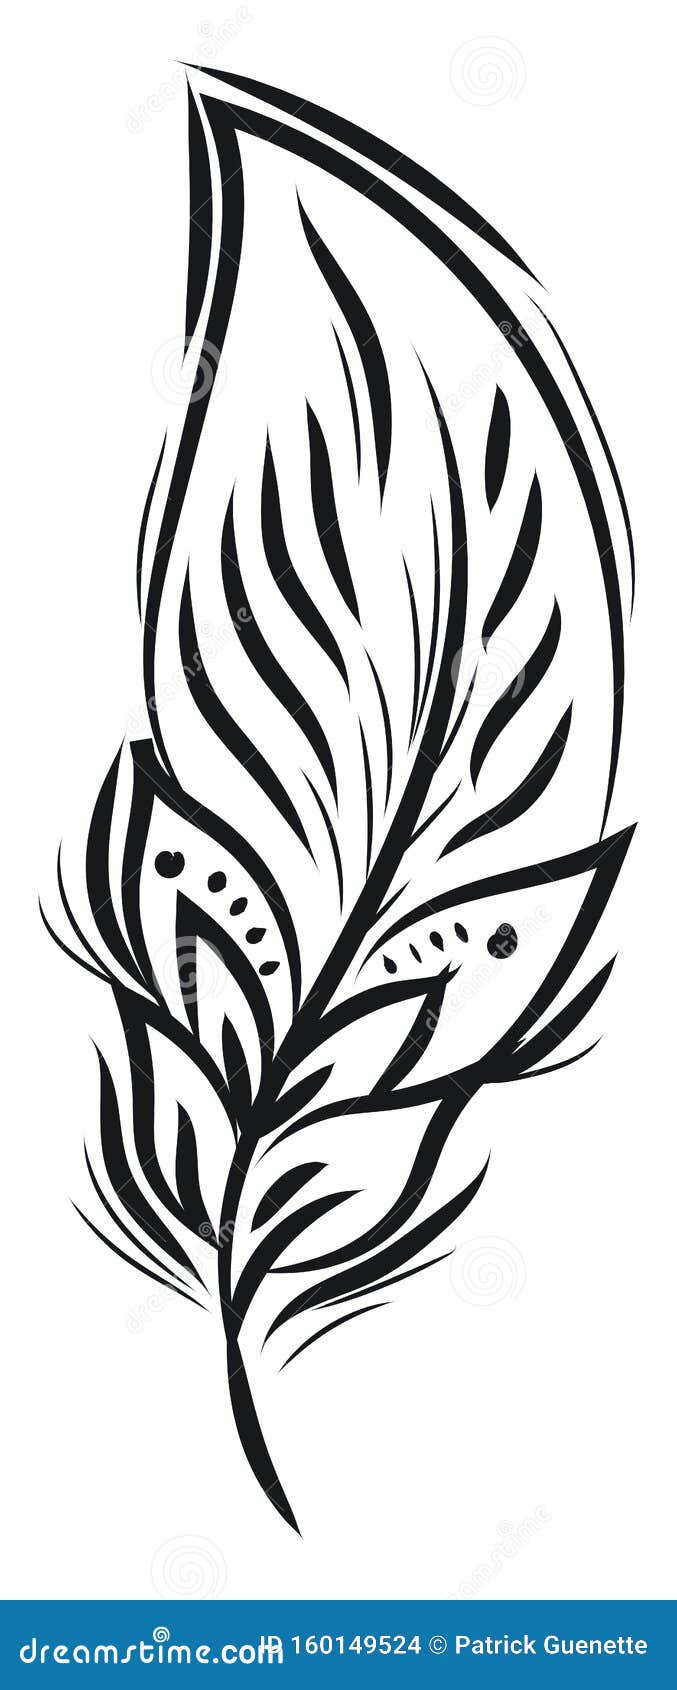 Download Black And White Feather Design Vector Or Color ...